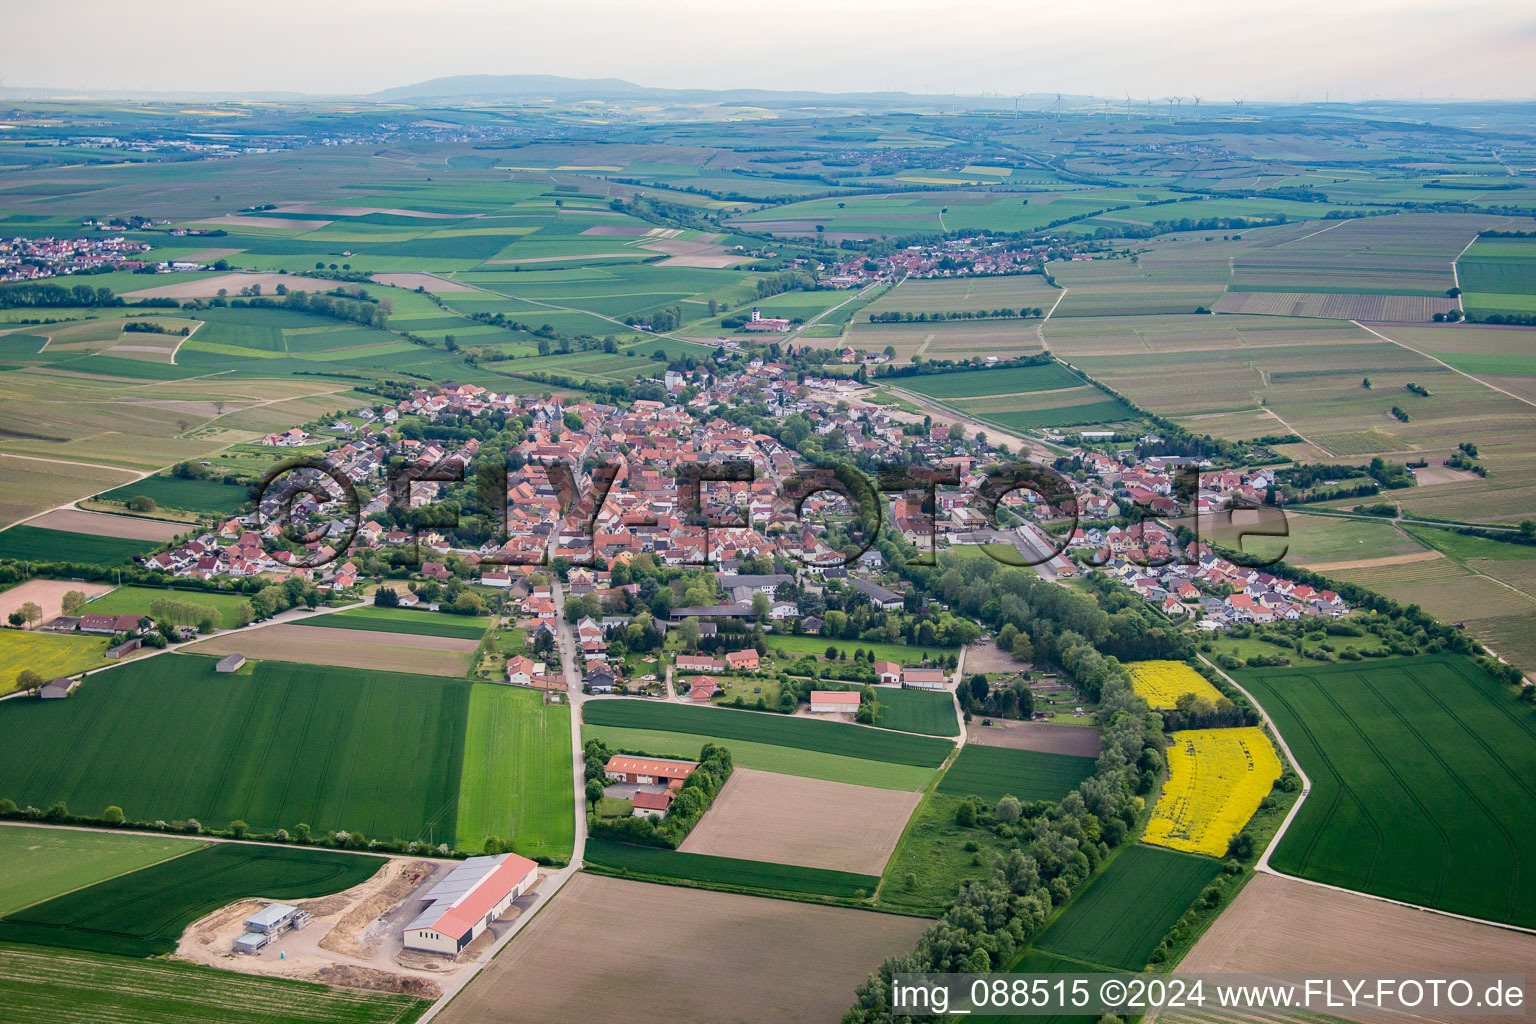 Aerial photograpy of Bechtolsheim in the state Rhineland-Palatinate, Germany